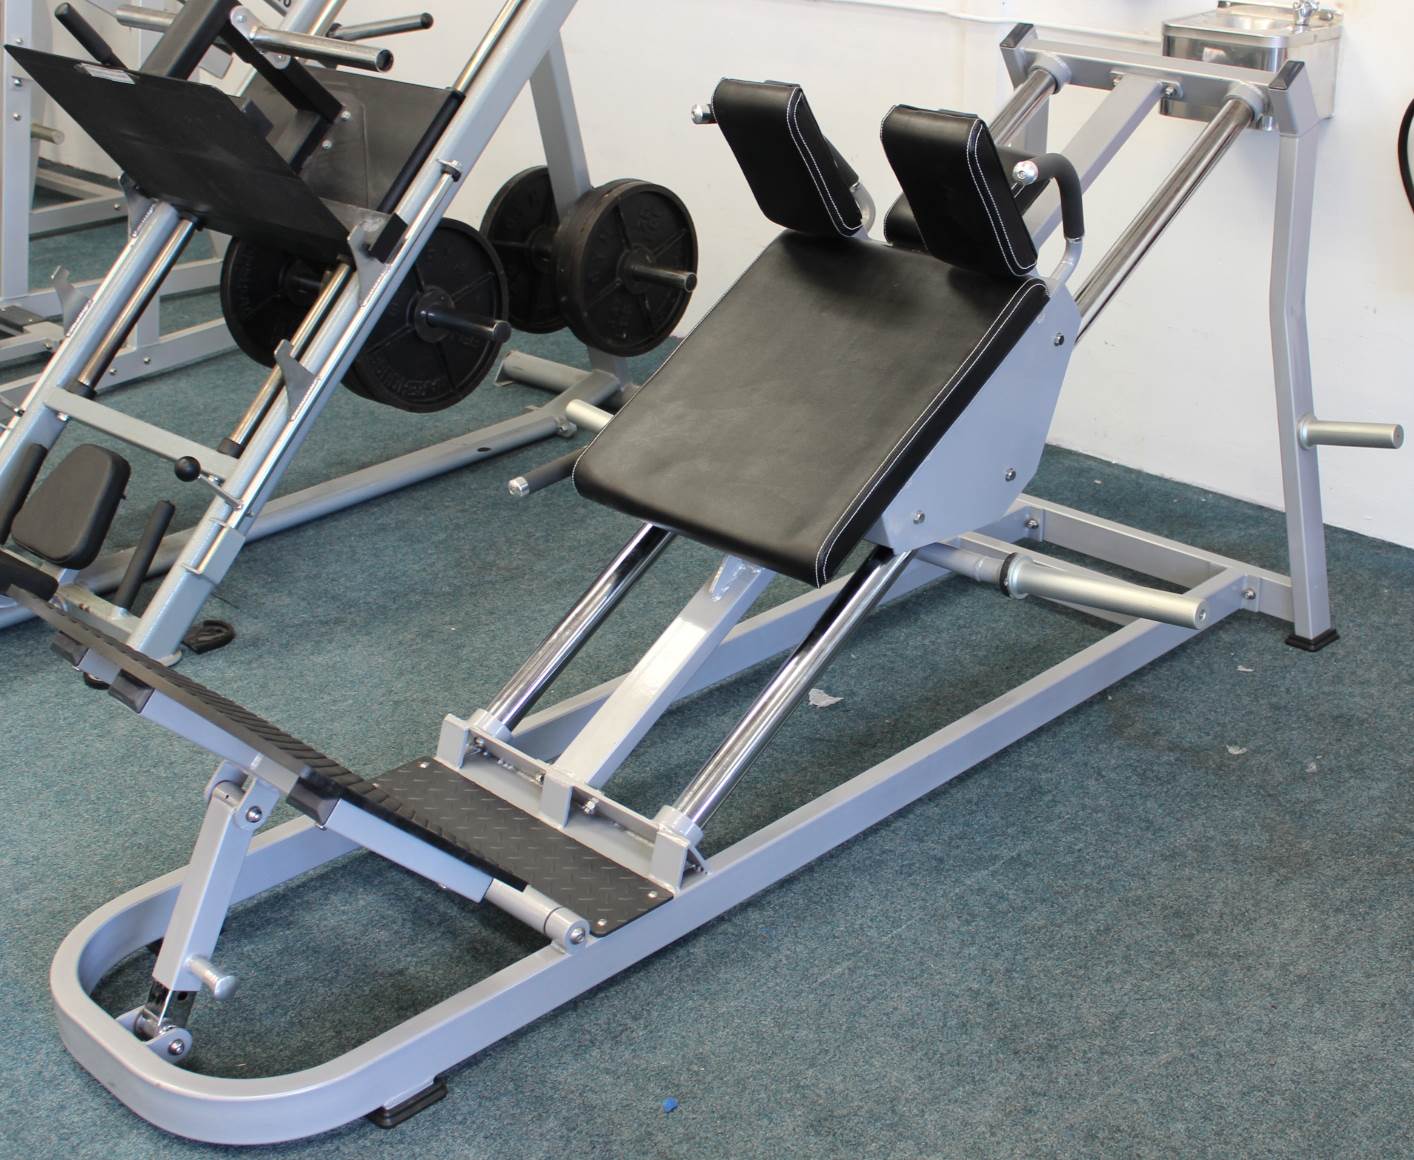 Weight Lifting Equipment UK At Gymwarehouse, we can give you premium weight lifting equipment in UK for the best price. For any related concern, drop a mail at info@gymwarehouse.co.uk and visit at https://www.gymwarehouse.co.uk by Gymwarehouse